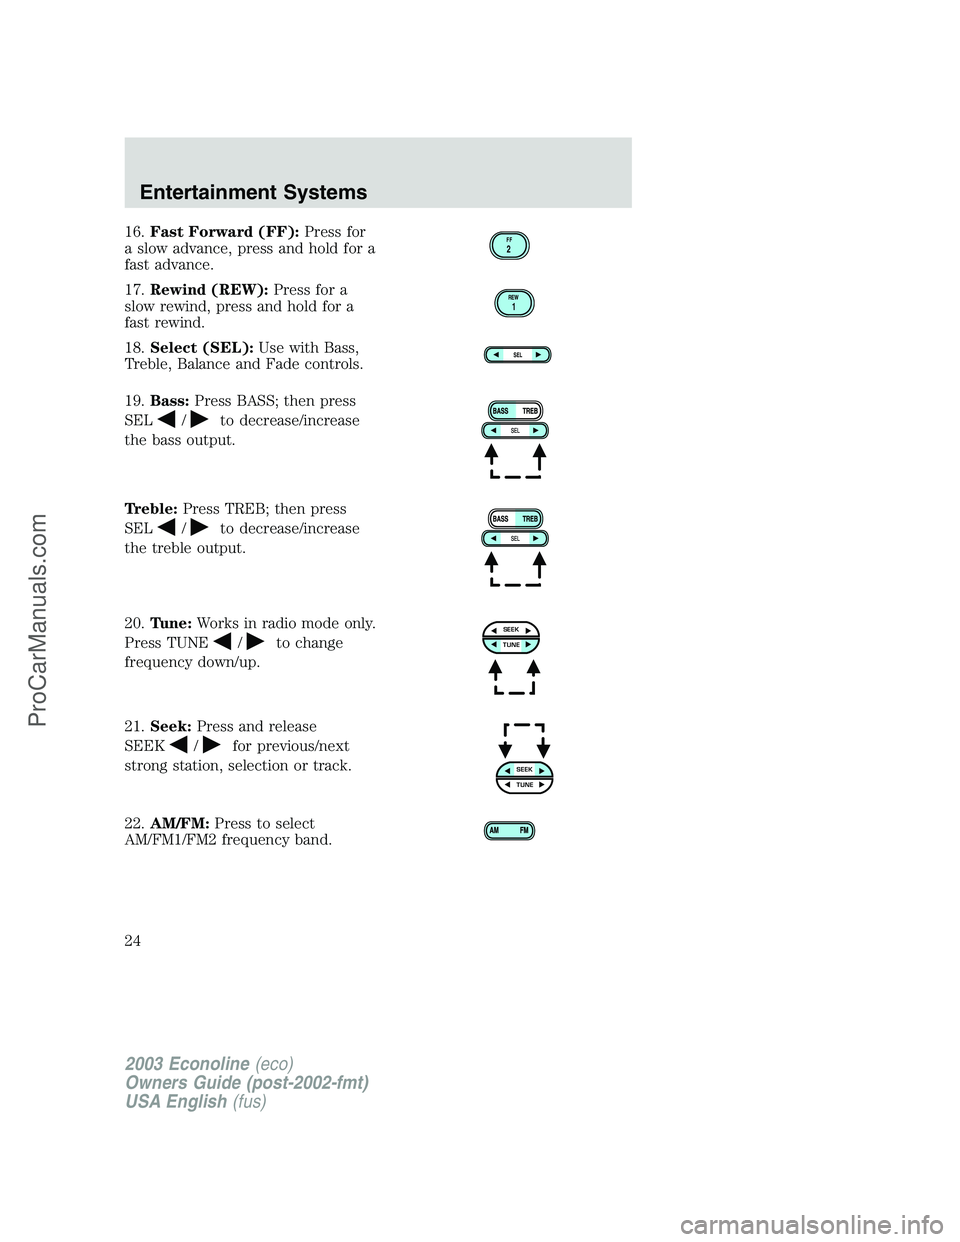 FORD E-450 2003 Owners Manual 16.Fast Forward (FF):Press for
a slow advance, press and hold for a
fast advance.
17.Rewind (REW):Press for a
slow rewind, press and hold for a
fast rewind.
18.Select (SEL):Use with Bass,
Treble, Bala